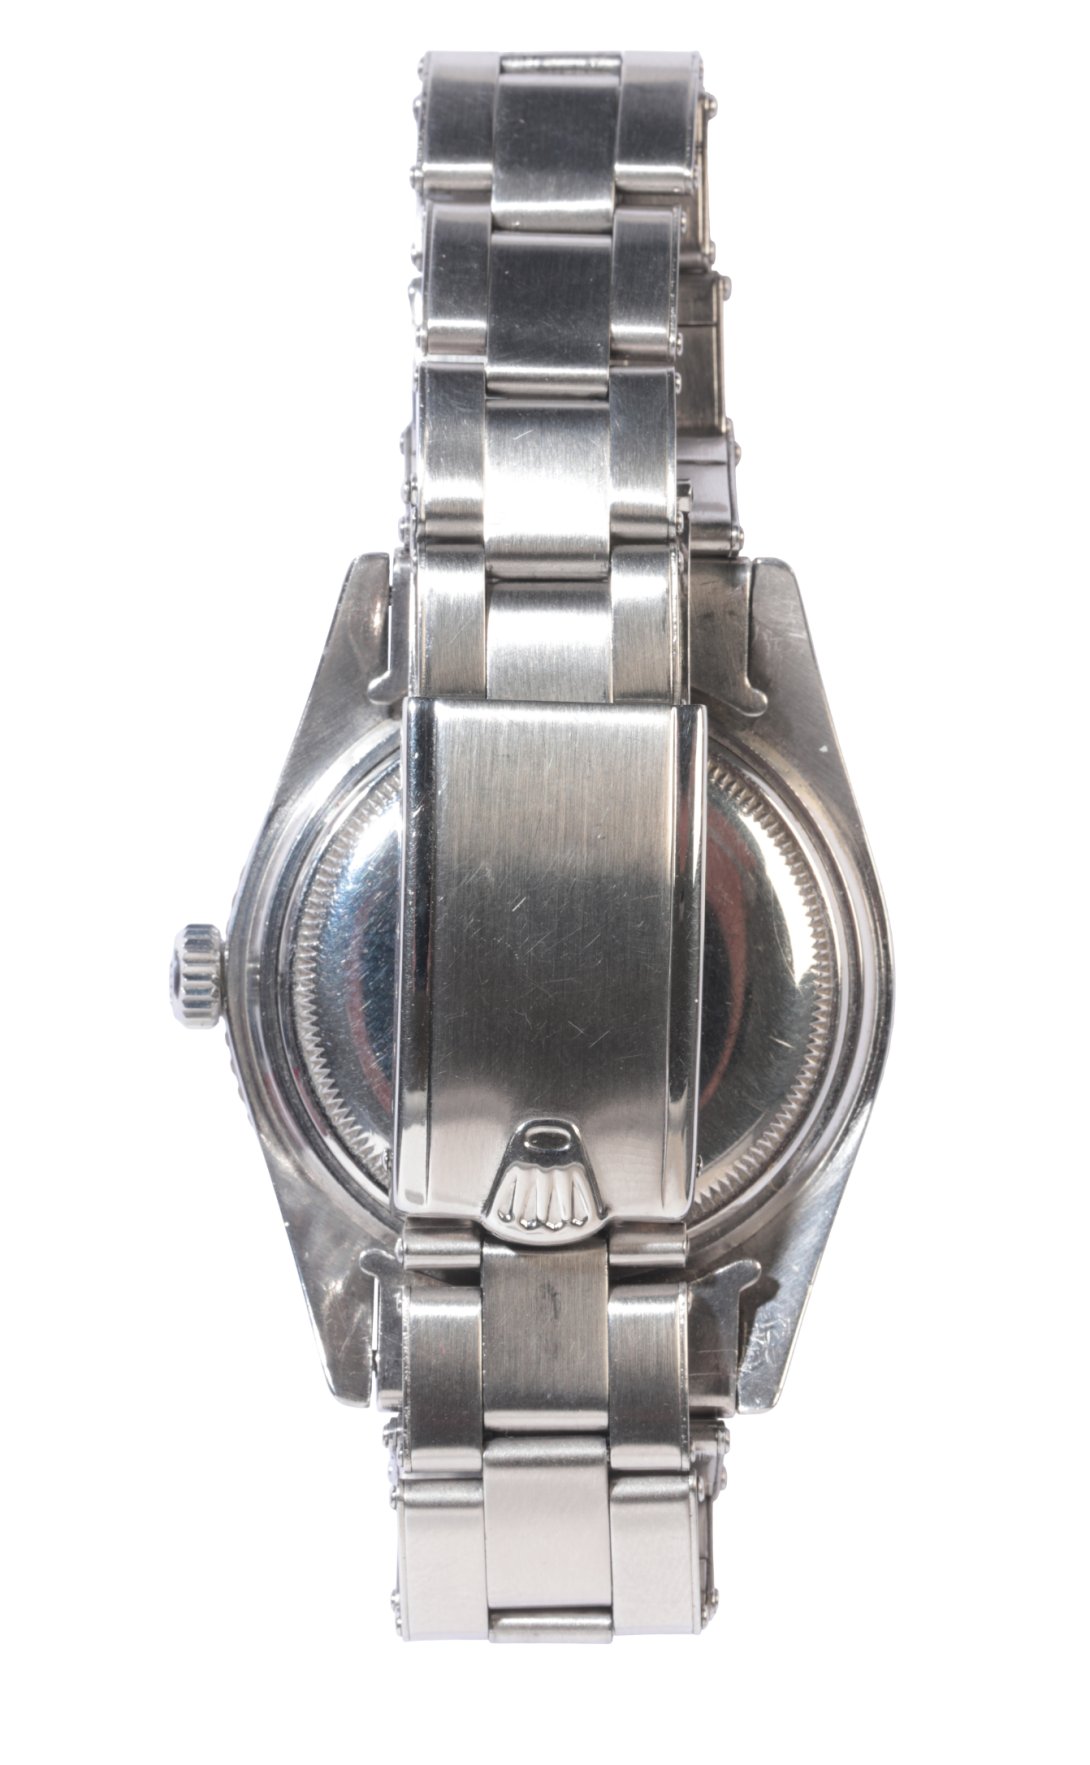 ROLEX GMT MASTER OYSTER PERPETUAL "PUSSY GALORE": A GENTLEMAN'S STAINLESS STEEL BRACELET WATCH - Image 8 of 9